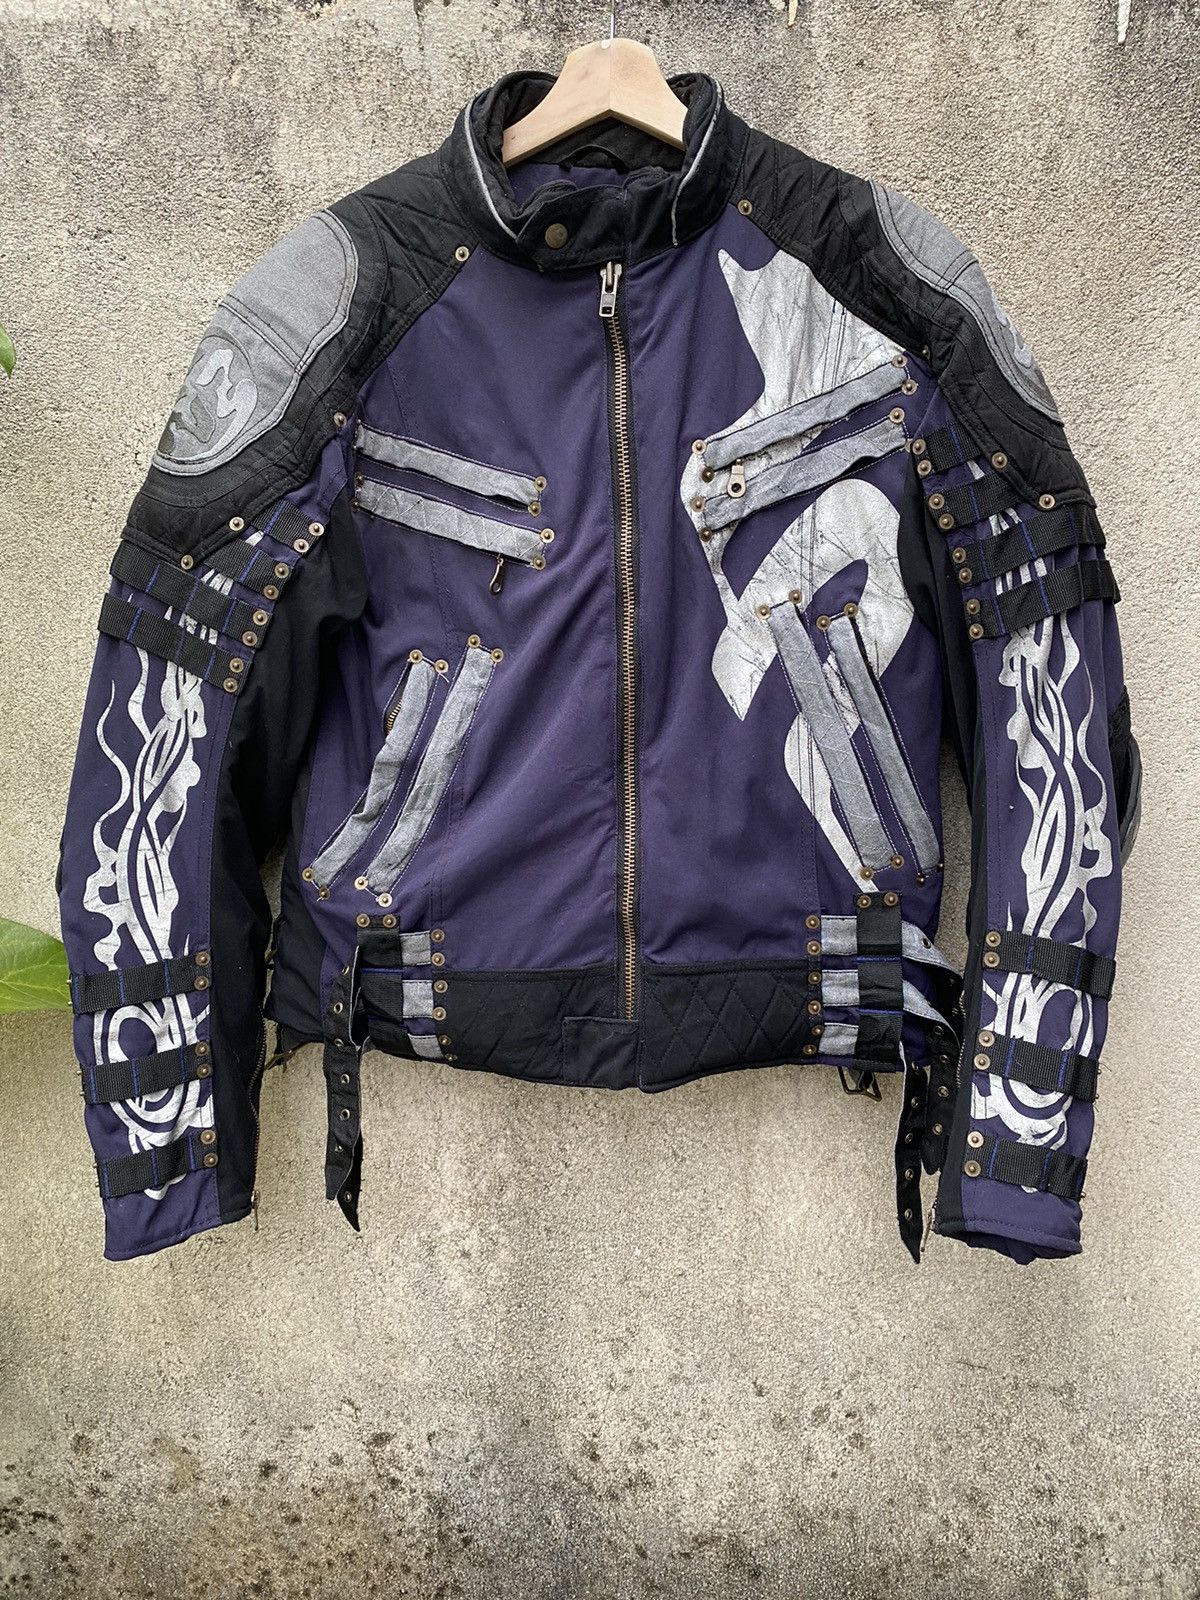 Sports Specialties - 🔥 Japanese Tradition Motorcycle Riding Jacket Rare Design - 2